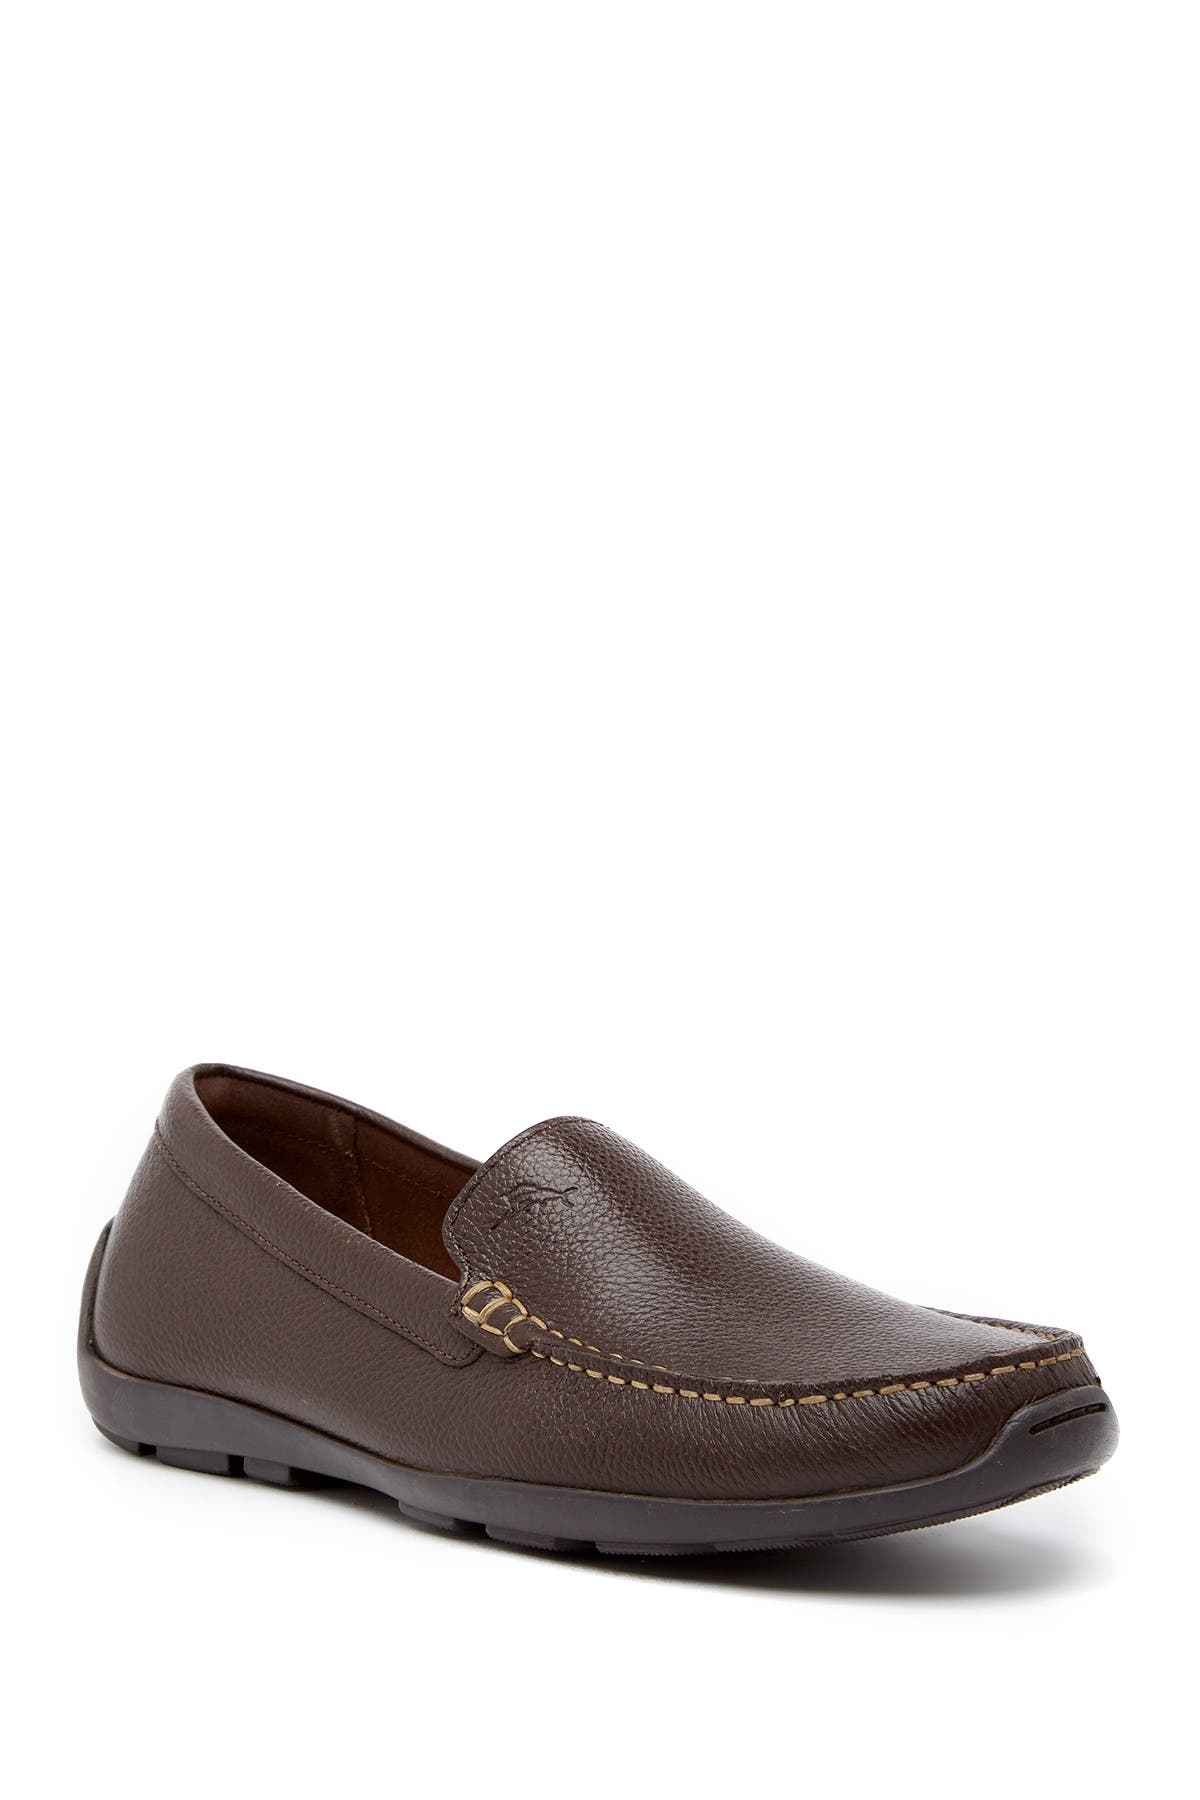 tommy bahama leather shoes